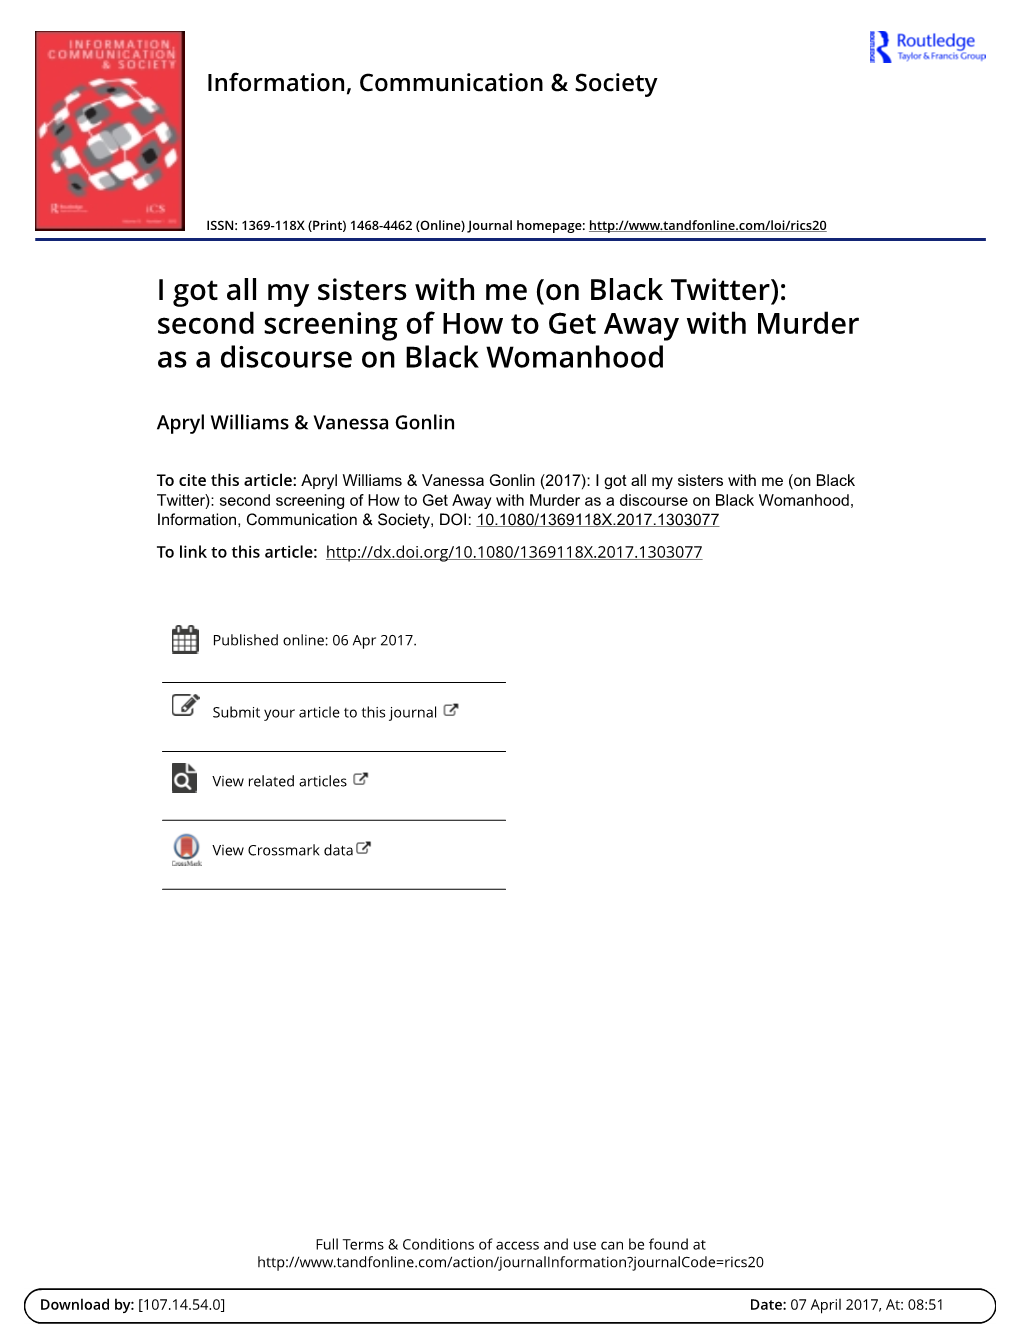 (On Black Twitter): Second Screening of How to Get Away with Murder As a Discourse on Black Womanhood